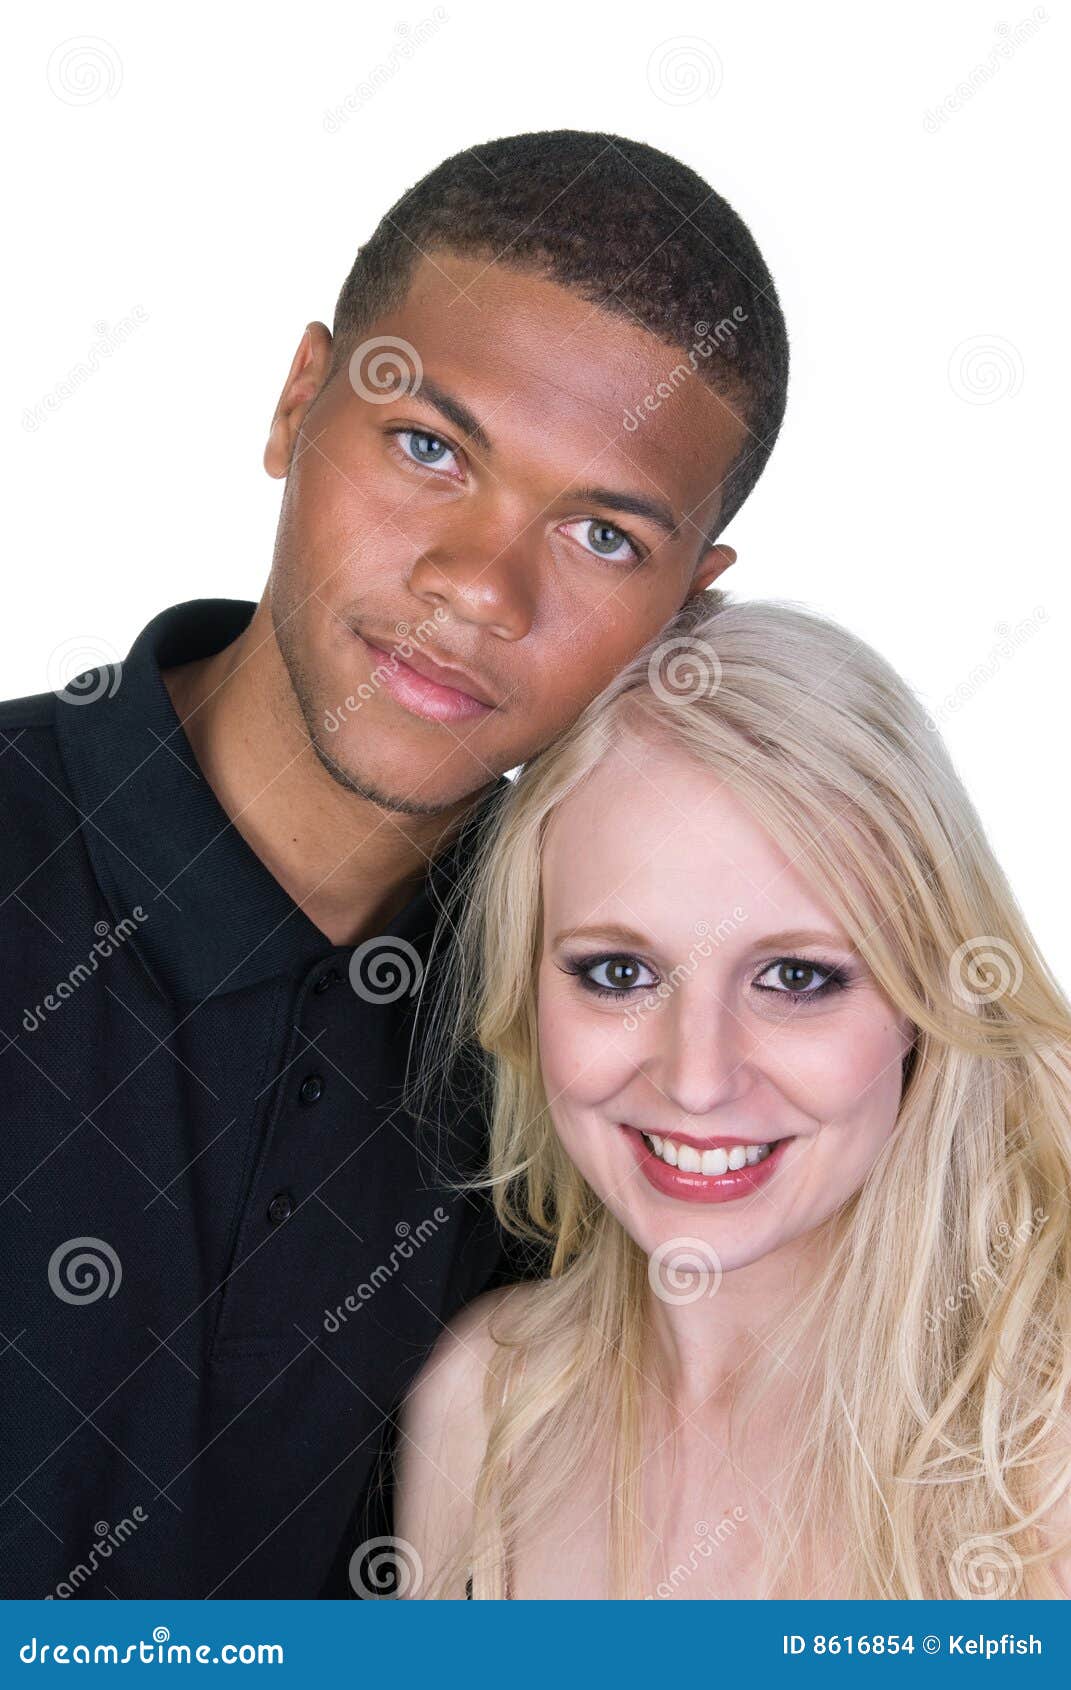 images of black man and white woman